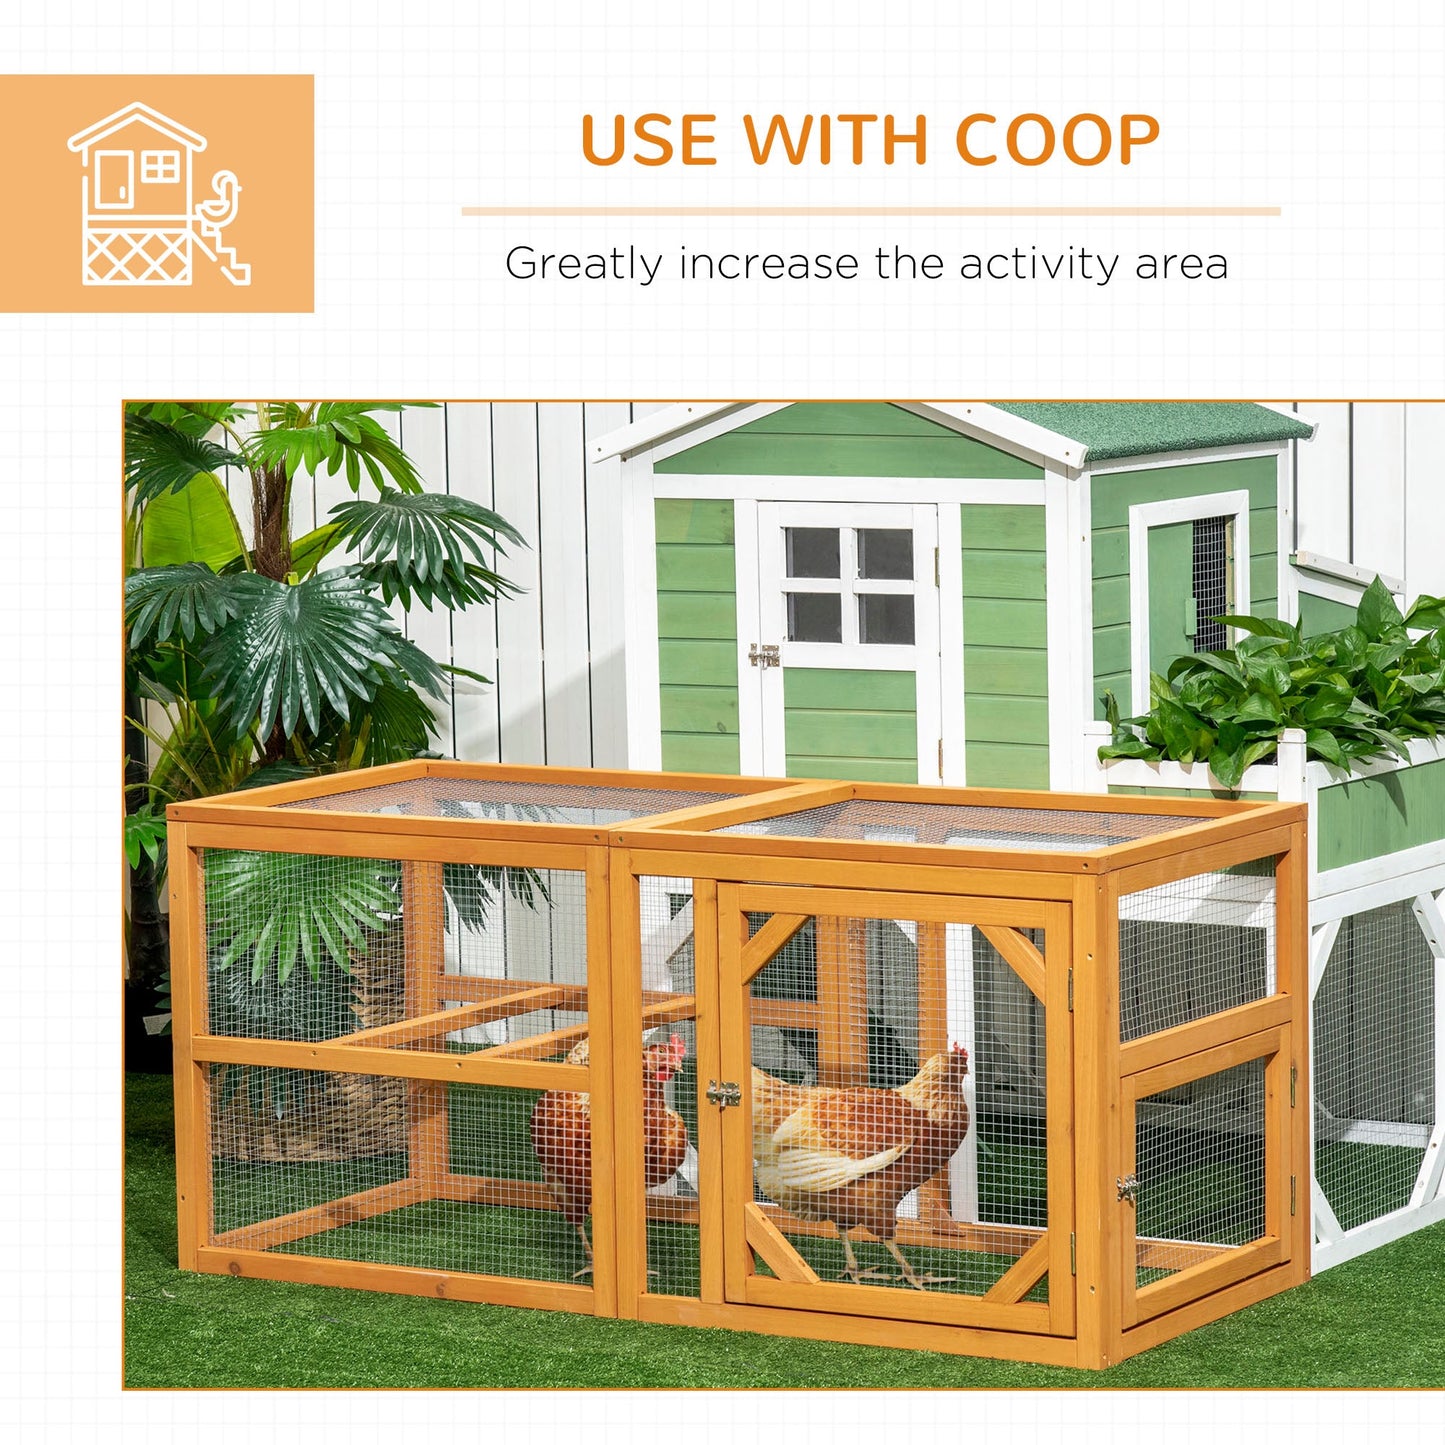 -PawHut 55" Wooden Chicken Coop, Large Chicken Run with Combinable Design, Poultry Pen, Orange - Outdoor Style Company